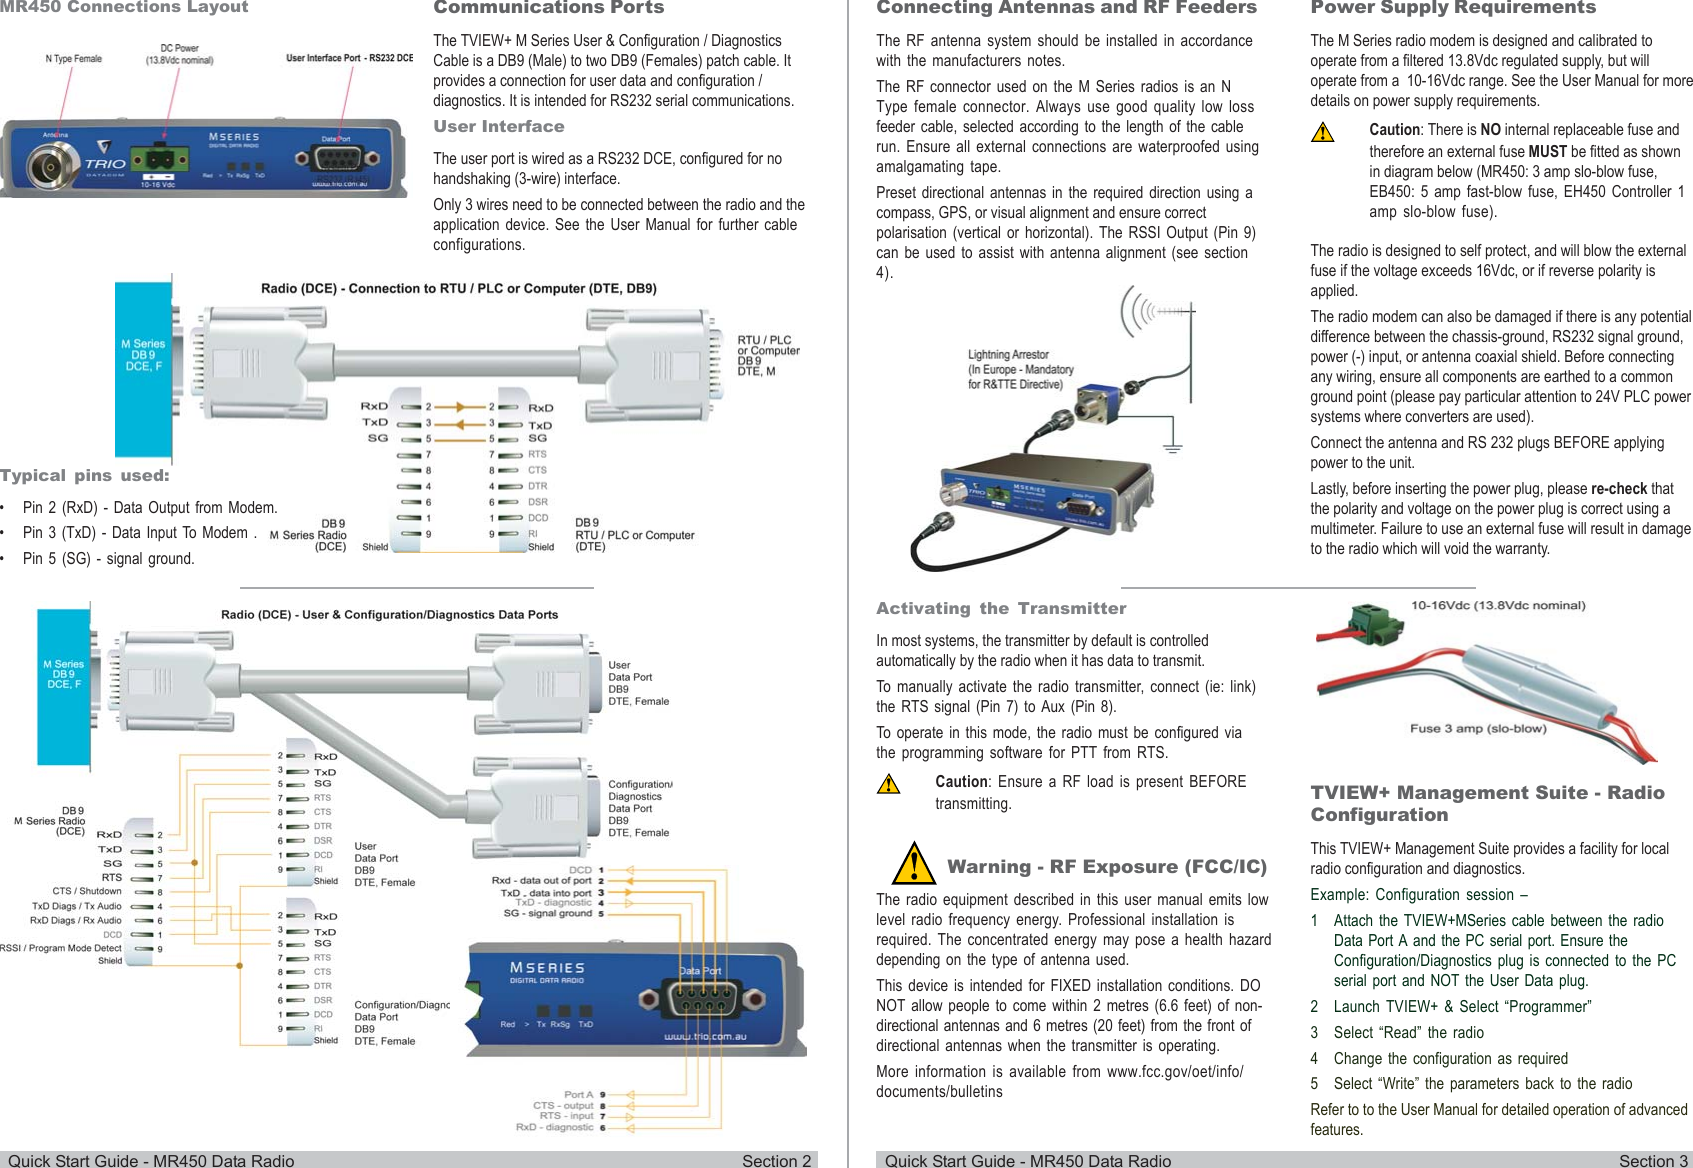 Quick Start Guide - MR450 Data Radio Section 2 Quick Start Guide - MR450 Data Radio Section 3Communications PortsThe TVIEW+ M Series User &amp; Configuration / DiagnosticsCable is a DB9 (Male) to two DB9 (Females) patch cable. Itprovides a connection for user data and configuration /diagnostics. It is intended for RS232 serial communications.User InterfaceThe user port is wired as a RS232 DCE, configured for nohandshaking (3-wire) interface.Only 3 wires need to be connected between the radio and theapplication device. See the User Manual for further cableconfigurations.MR450 Connections LayoutTypical pins used:• Pin 2 (RxD) - Data Output from Modem.• Pin 3 (TxD) - Data Input To Modem .• Pin 5 (SG) - signal ground.Connecting Antennas and RF FeedersThe RF antenna system should be installed in accordancewith the manufacturers notes.The RF connector used on the M Series radios is an NType female connector. Always use good quality low lossfeeder cable, selected according to the length of the cablerun. Ensure all external connections are waterproofed usingamalgamating tape.Preset directional antennas in the required direction using acompass, GPS, or visual alignment and ensure correctpolarisation (vertical or horizontal). The RSSI Output (Pin 9)can be used to assist with antenna alignment (see section4).Activating the TransmitterIn most systems, the transmitter by default is controlledautomatically by the radio when it has data to transmit.To manually activate the radio transmitter, connect (ie: link)the RTS signal (Pin 7) to Aux (Pin 8).To operate in this mode, the radio must be configured viathe programming software for PTT from RTS.Caution: Ensure a RF load is present BEFOREtransmitting.Power Supply RequirementsThe M Series radio modem is designed and calibrated tooperate from a filtered 13.8Vdc regulated supply, but willoperate from a  10-16Vdc range. See the User Manual for moredetails on power supply requirements.Caution: There is NO internal replaceable fuse andtherefore an external fuse MUST be fitted as shownin diagram below (MR450: 3 amp slo-blow fuse,EB450: 5 amp fast-blow fuse, EH450 Controller 1amp slo-blow fuse).The radio is designed to self protect, and will blow the externalfuse if the voltage exceeds 16Vdc, or if reverse polarity isapplied.The radio modem can also be damaged if there is any potentialdifference between the chassis-ground, RS232 signal ground,power (-) input, or antenna coaxial shield. Before connectingany wiring, ensure all components are earthed to a commonground point (please pay particular attention to 24V PLC powersystems where converters are used).Connect the antenna and RS 232 plugs BEFORE applyingpower to the unit.Lastly, before inserting the power plug, please re-check thatthe polarity and voltage on the power plug is correct using amultimeter. Failure to use an external fuse will result in damageto the radio which will void the warranty.TVIEW+ Management Suite - RadioConfigurationThis TVIEW+ Management Suite provides a facility for localradio configuration and diagnostics.Example: Configuration session –1 Attach the TVIEW+MSeries cable between the radioData Port A and the PC serial port. Ensure theConfiguration/Diagnostics plug is connected to the PCserial port and NOT the User Data plug.2 Launch TVIEW+ &amp; Select “Programmer”3 Select “Read” the radio4 Change the configuration as required5 Select “Write” the parameters back to the radioRefer to to the User Manual for detailed operation of advancedfeatures.Warning - RF Exposure (FCC/IC)The radio equipment described in this user manual emits lowlevel radio frequency energy. Professional installation isrequired. The concentrated energy may pose a health hazarddepending on the type of antenna used.This device is intended for FIXED installation conditions. DONOT allow people to come within 2 metres (6.6 feet) of non-directional antennas and 6 metres (20 feet) from the front ofdirectional antennas when the transmitter is operating.More information is available from www.fcc.gov/oet/info/documents/bulletins